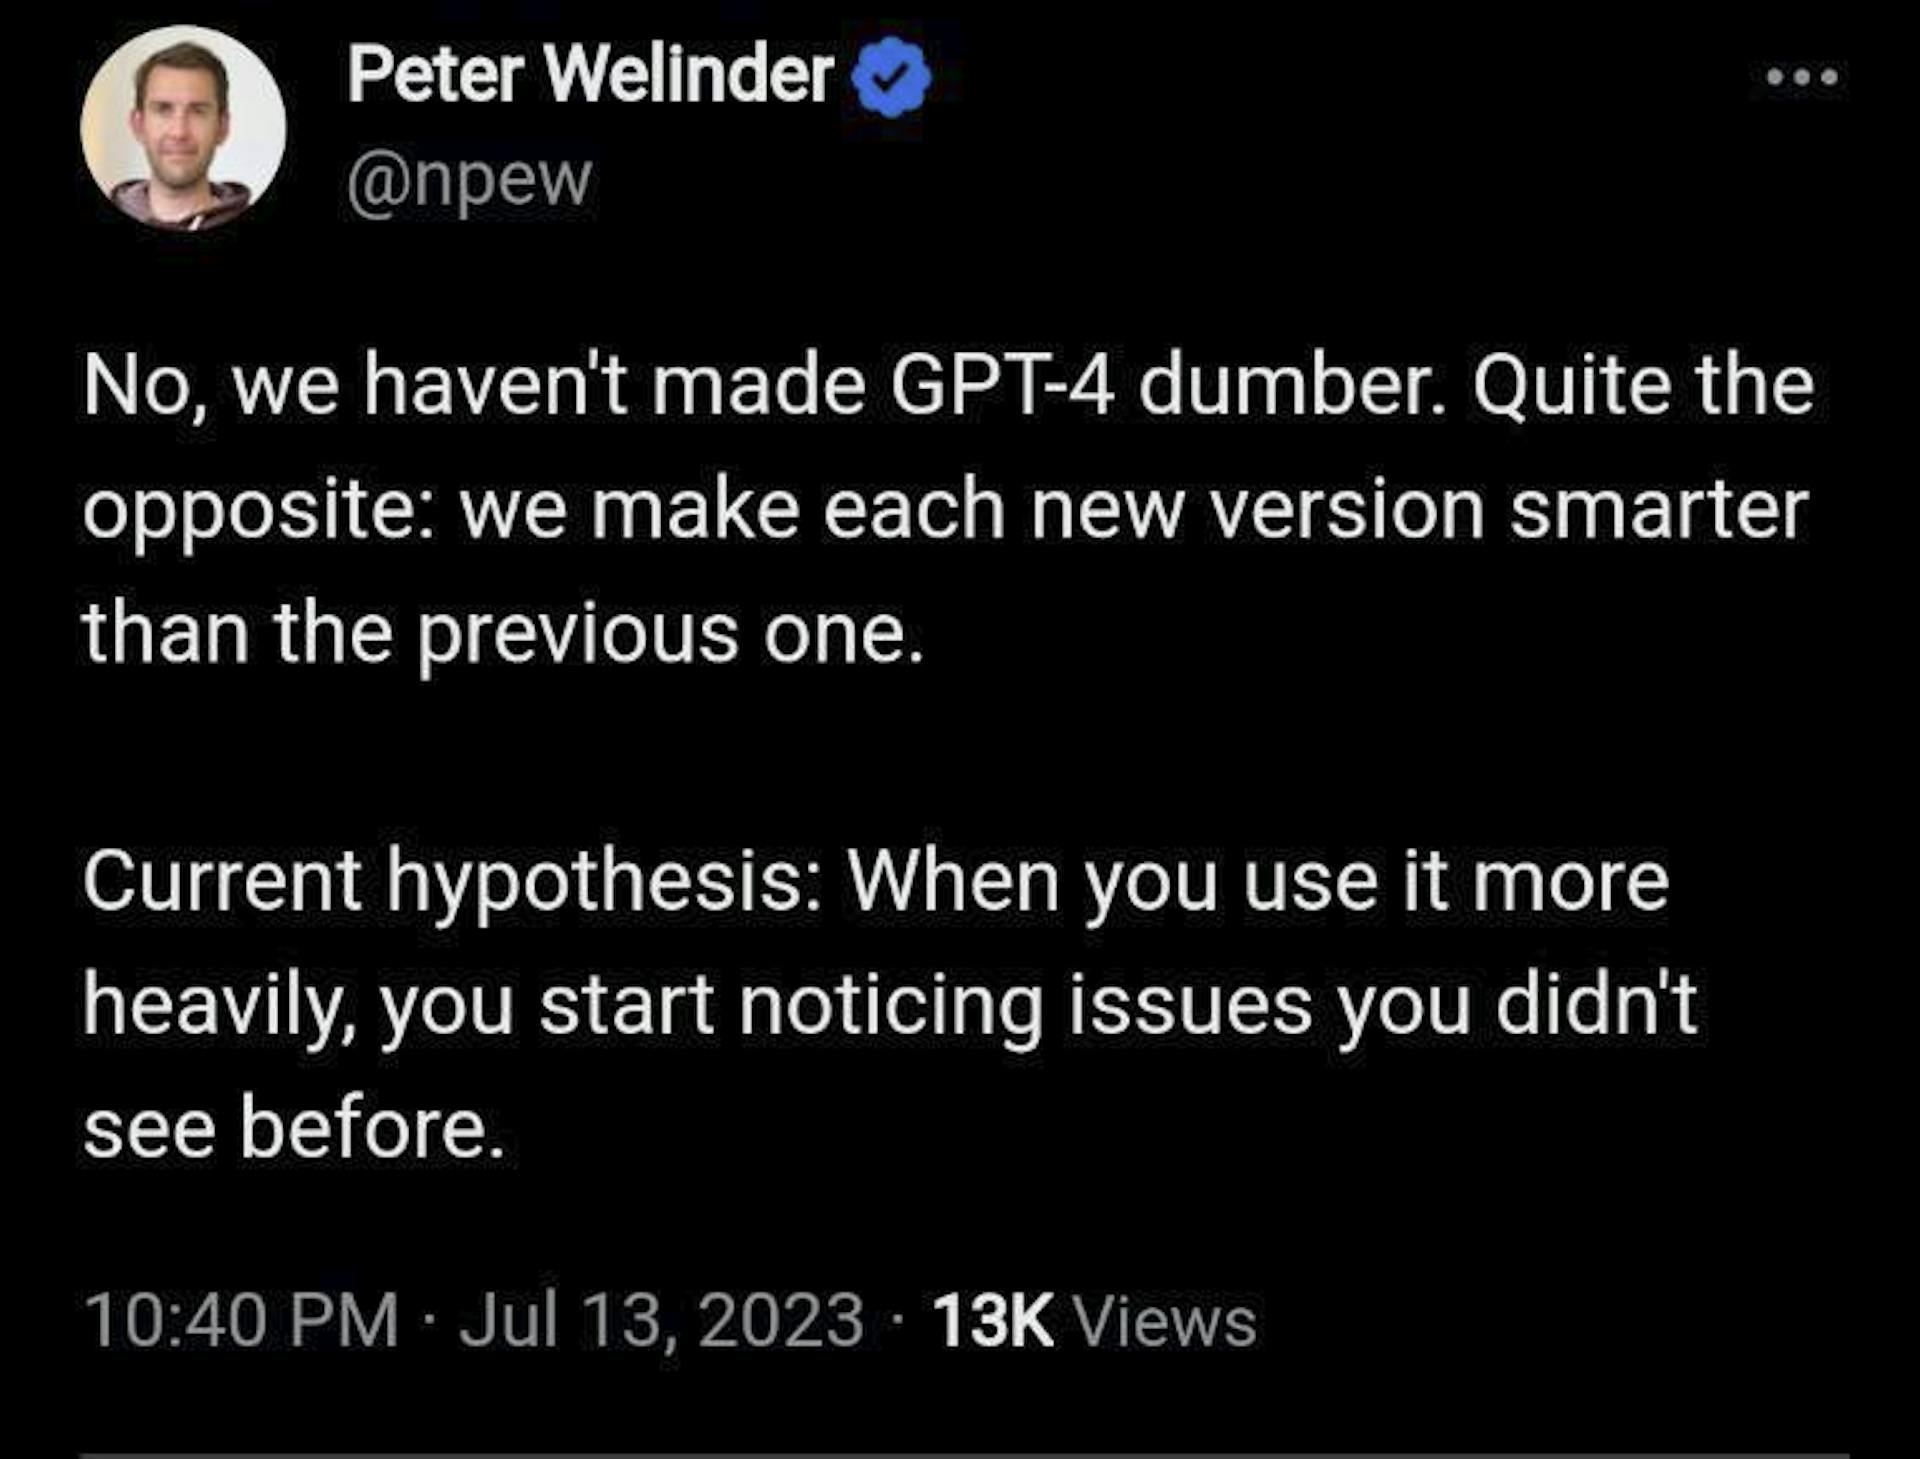 The official stance on GPT4 dumber.